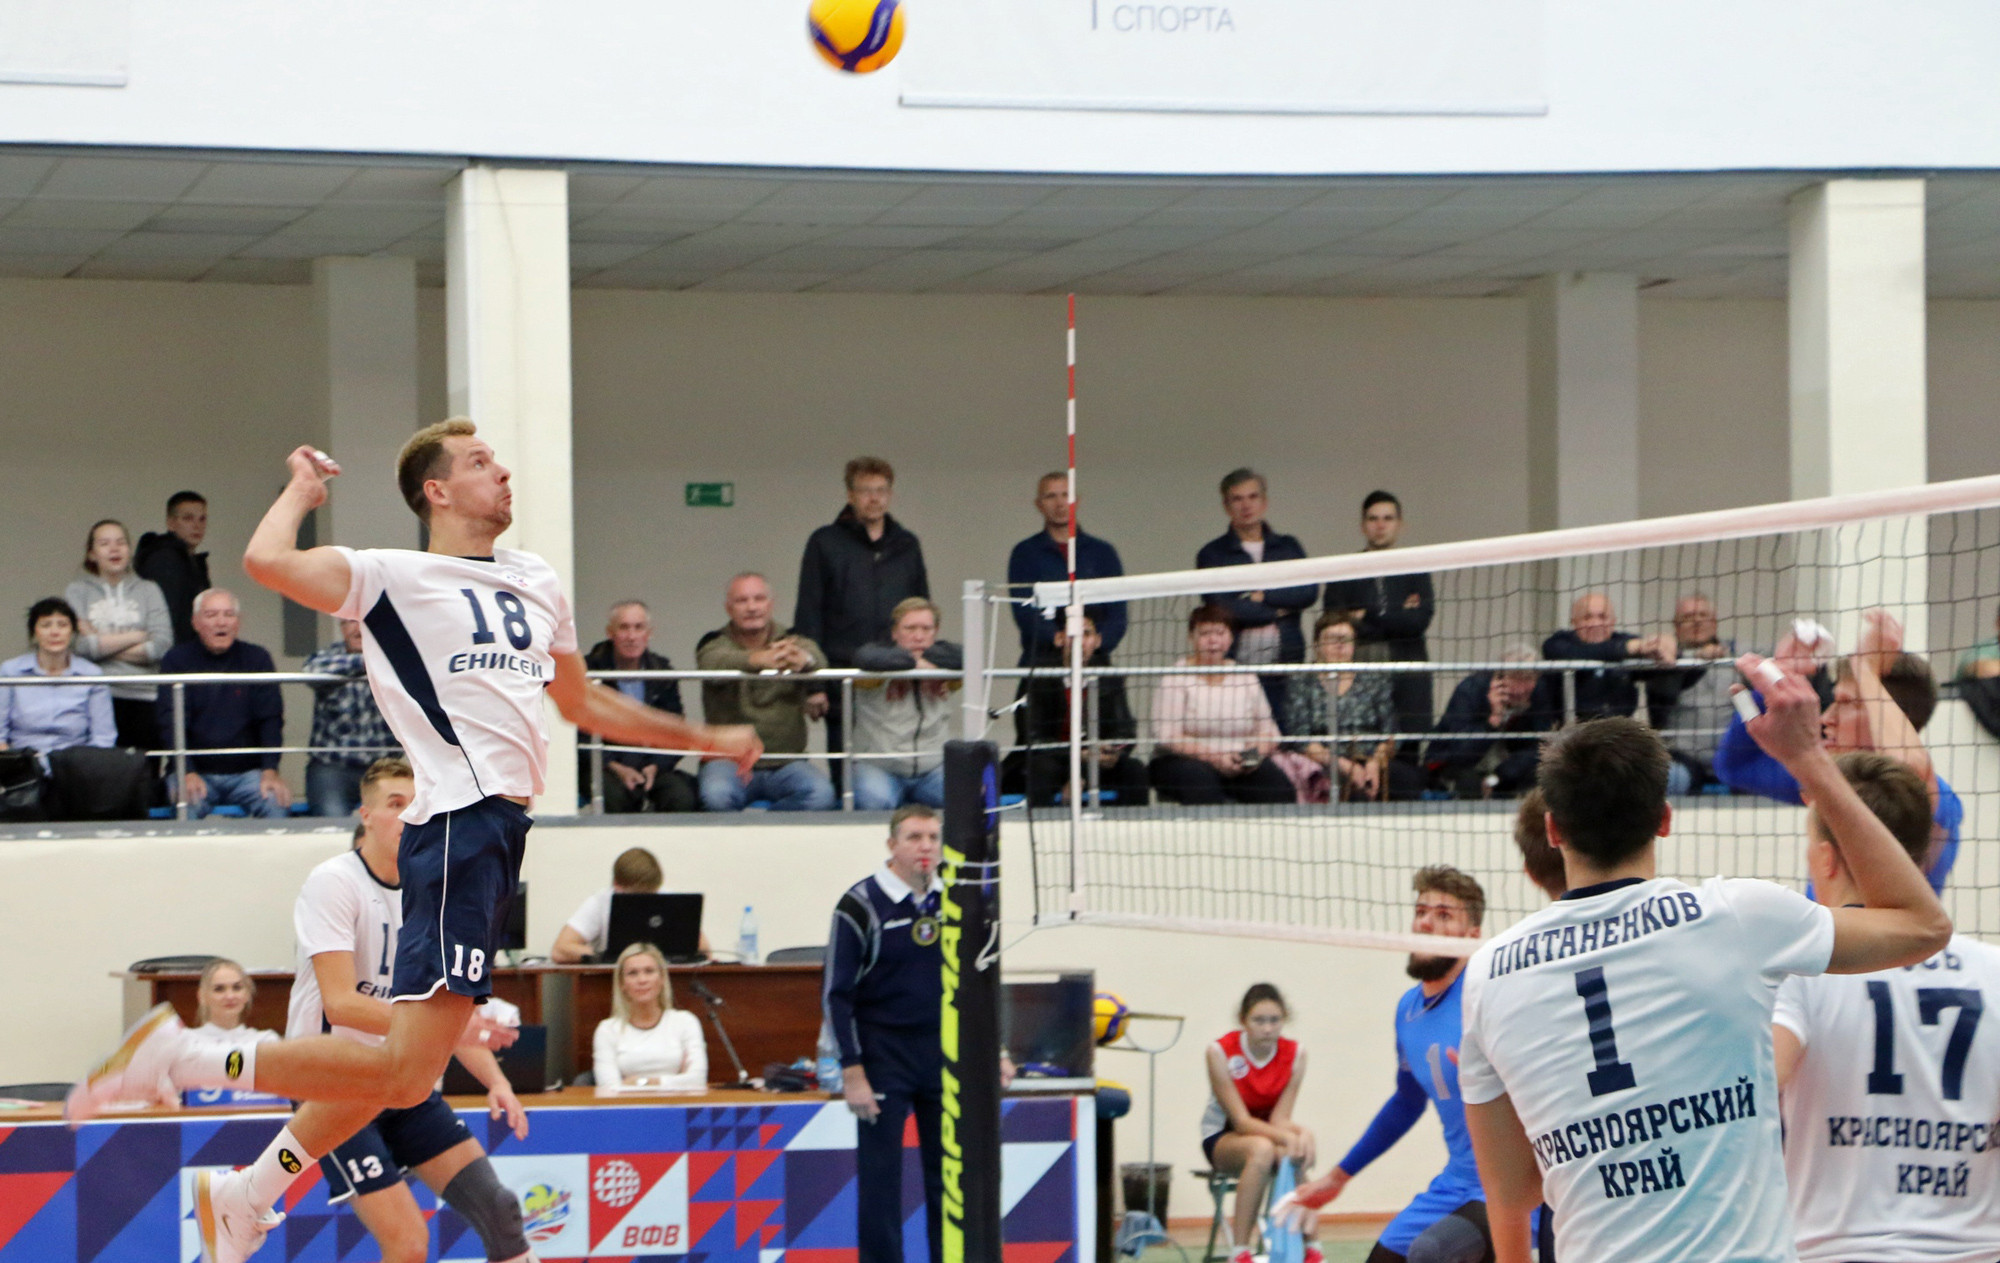 The Yenisey Volleyball Club men's team lost their opening match of the Russian Volleyball Super League ©FISU